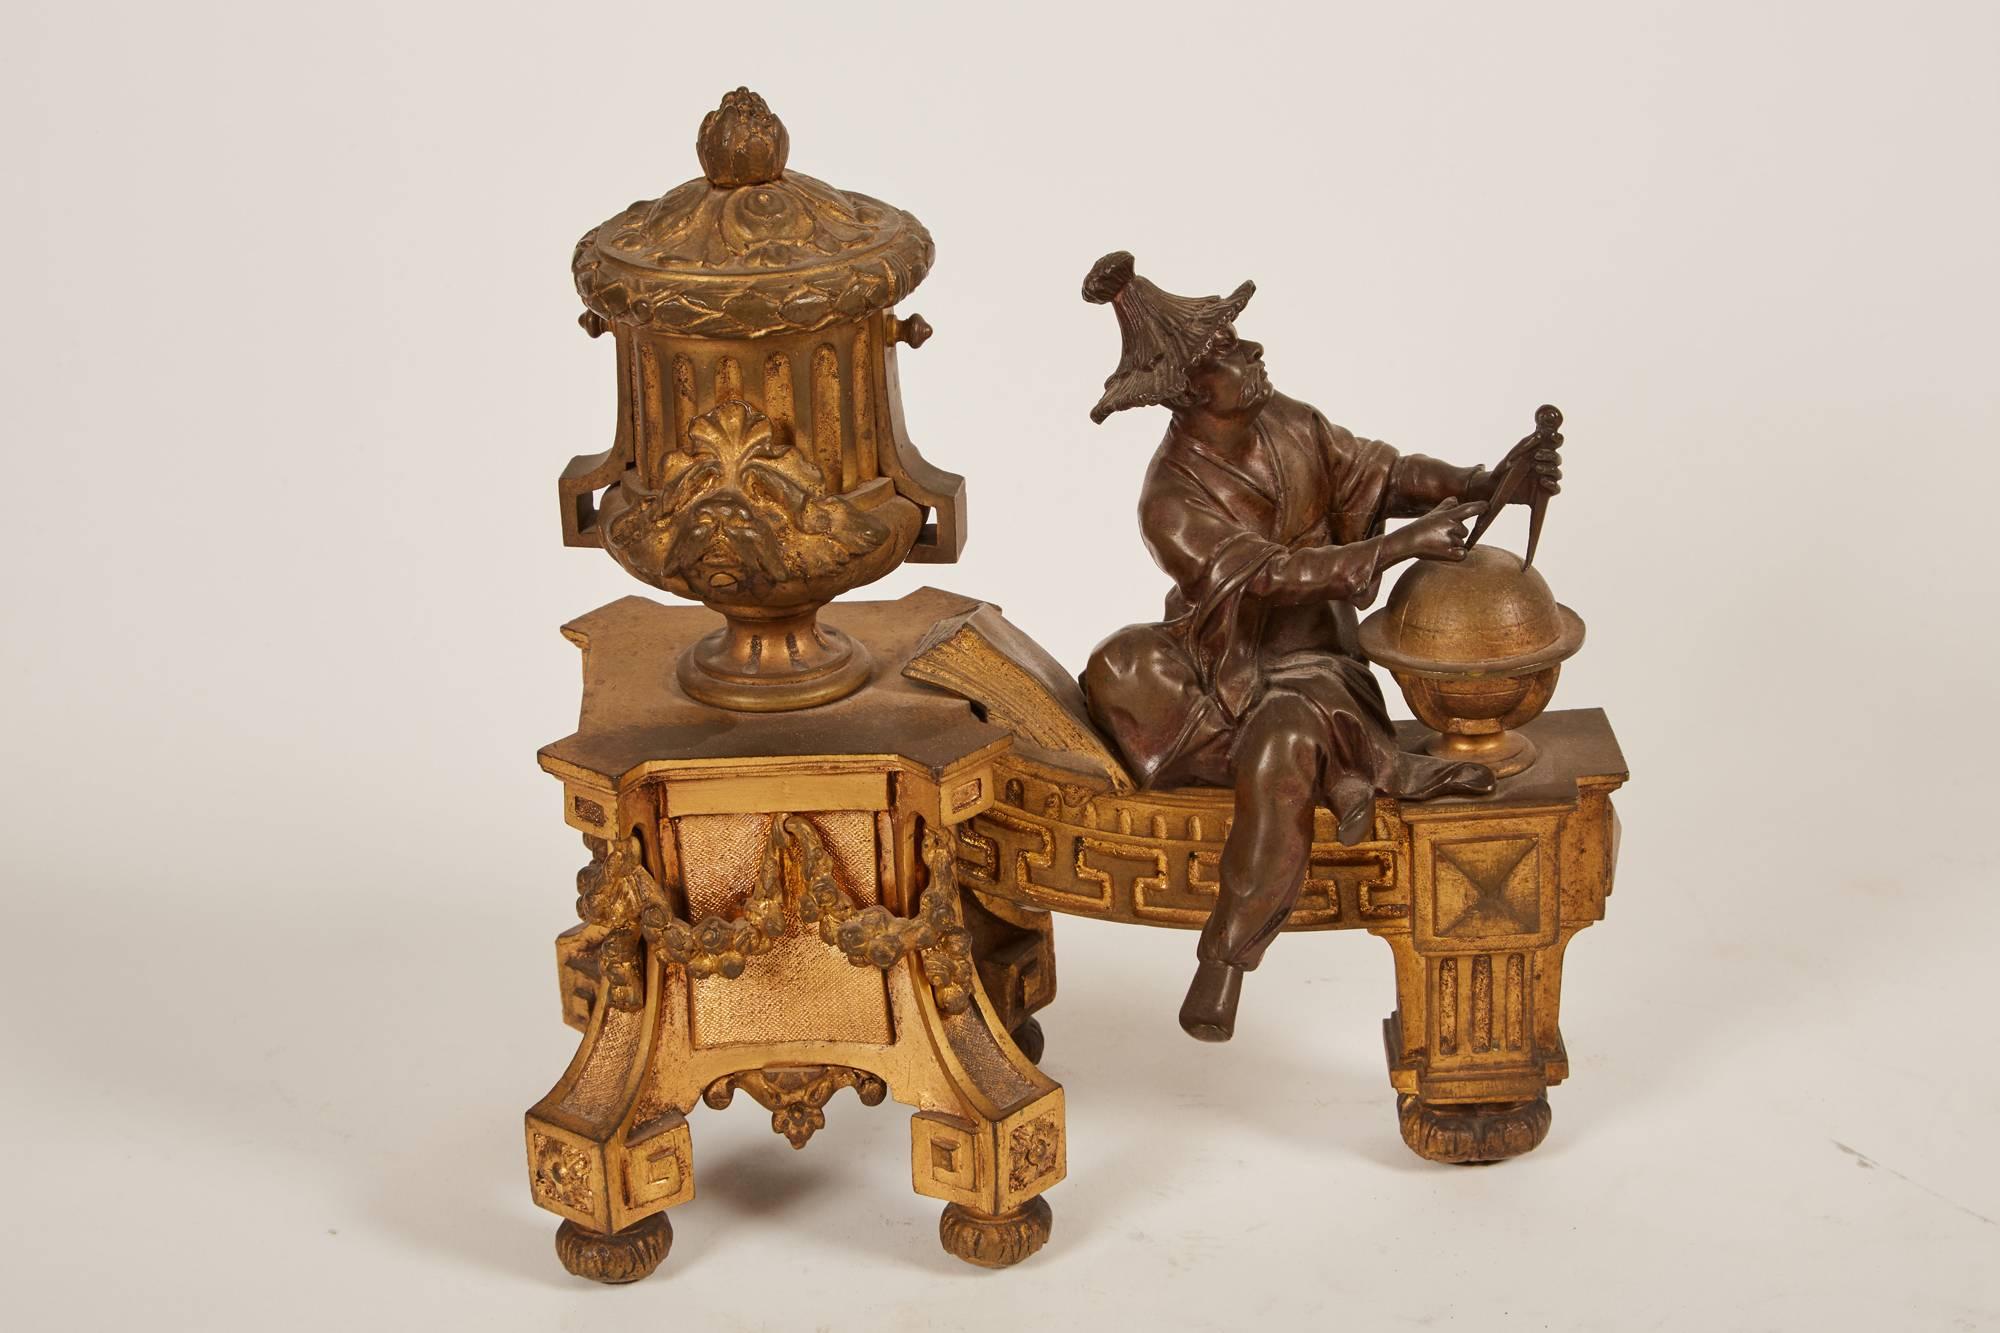 A pair of unique late 19th century, Chinese gilt bronze chenets, featuring two men portraying an astronomer and an astrologer with great ornamentation and swag detailing. In the transitional style, these two chenets have detailed fluting and other